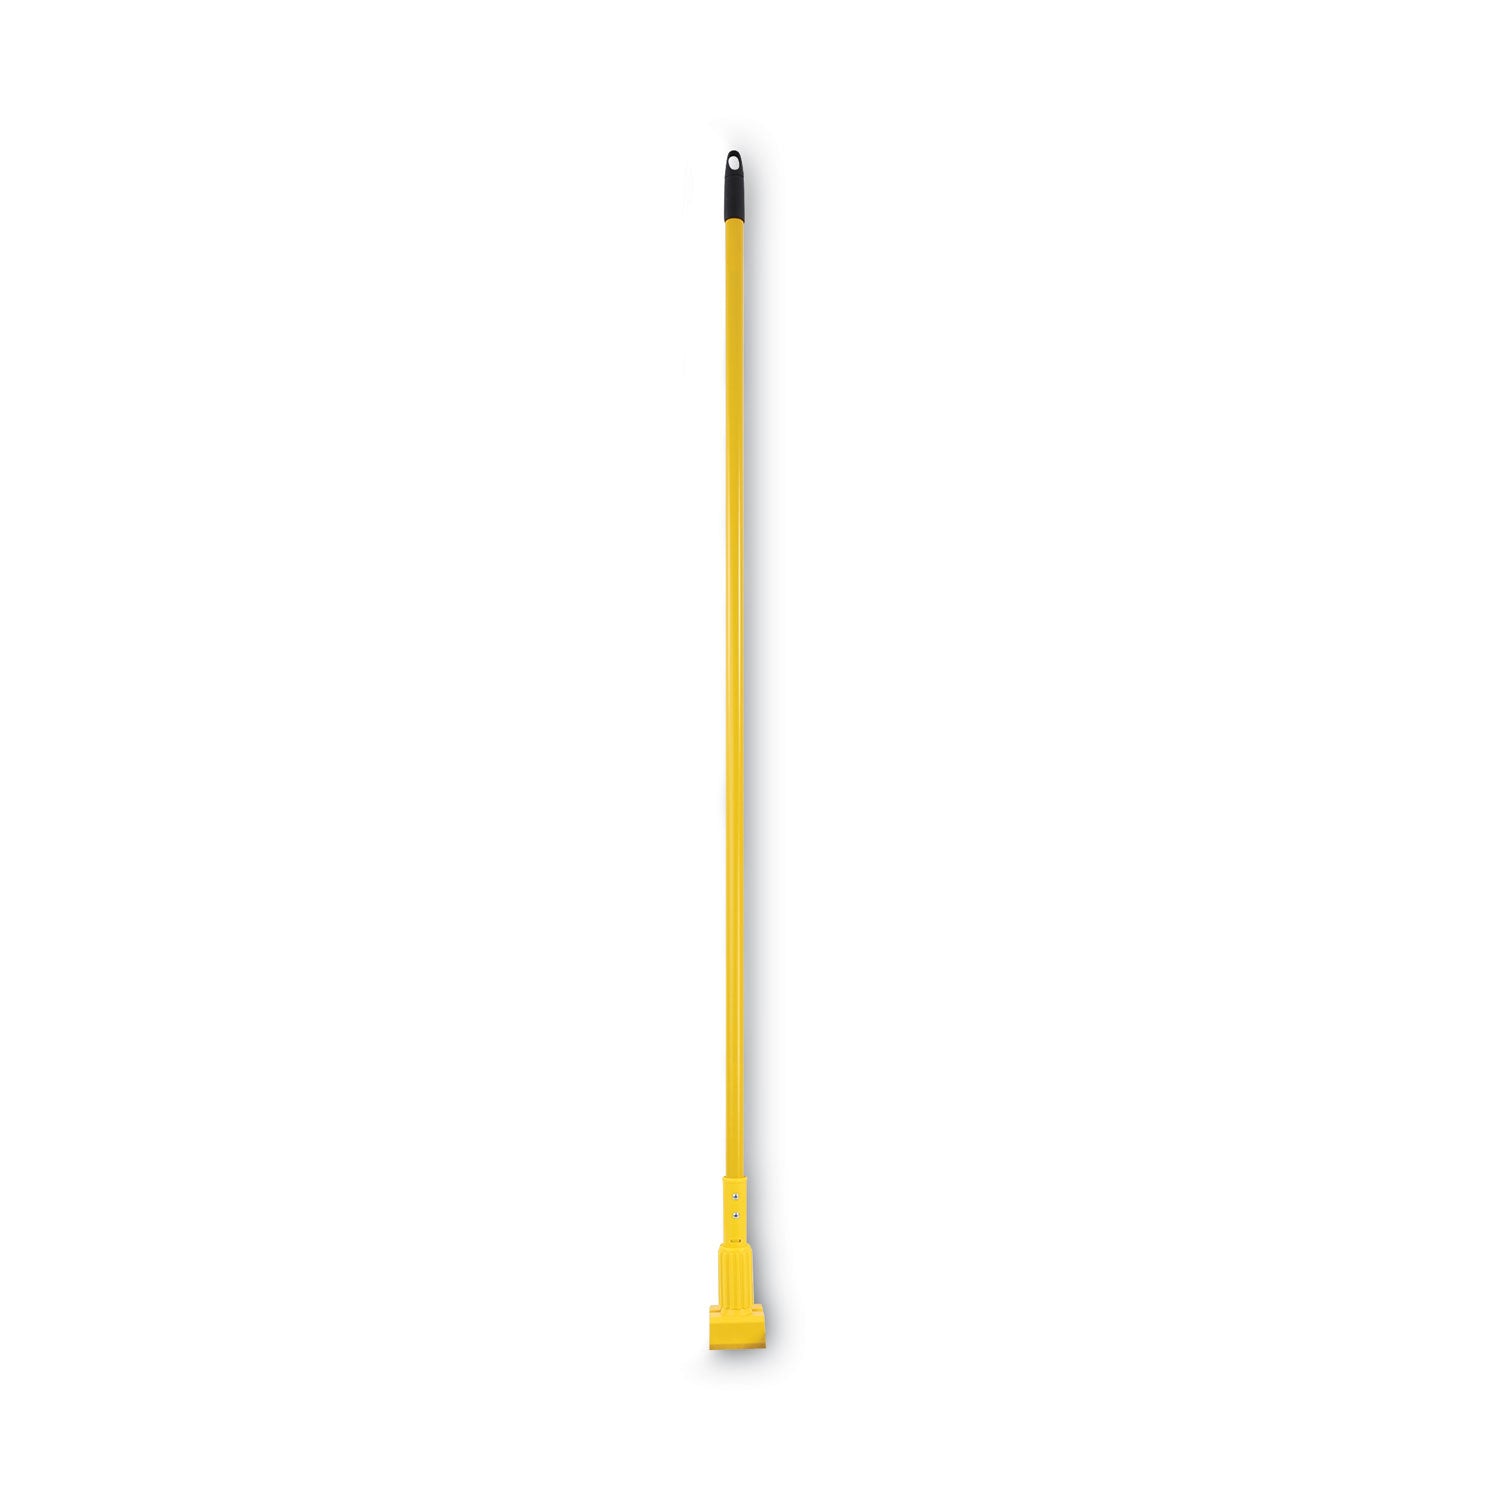 Plastic Jaws Mop Handle for 5 Wide Mop Heads, Aluminum, 1" dia x 60", Yellow - 